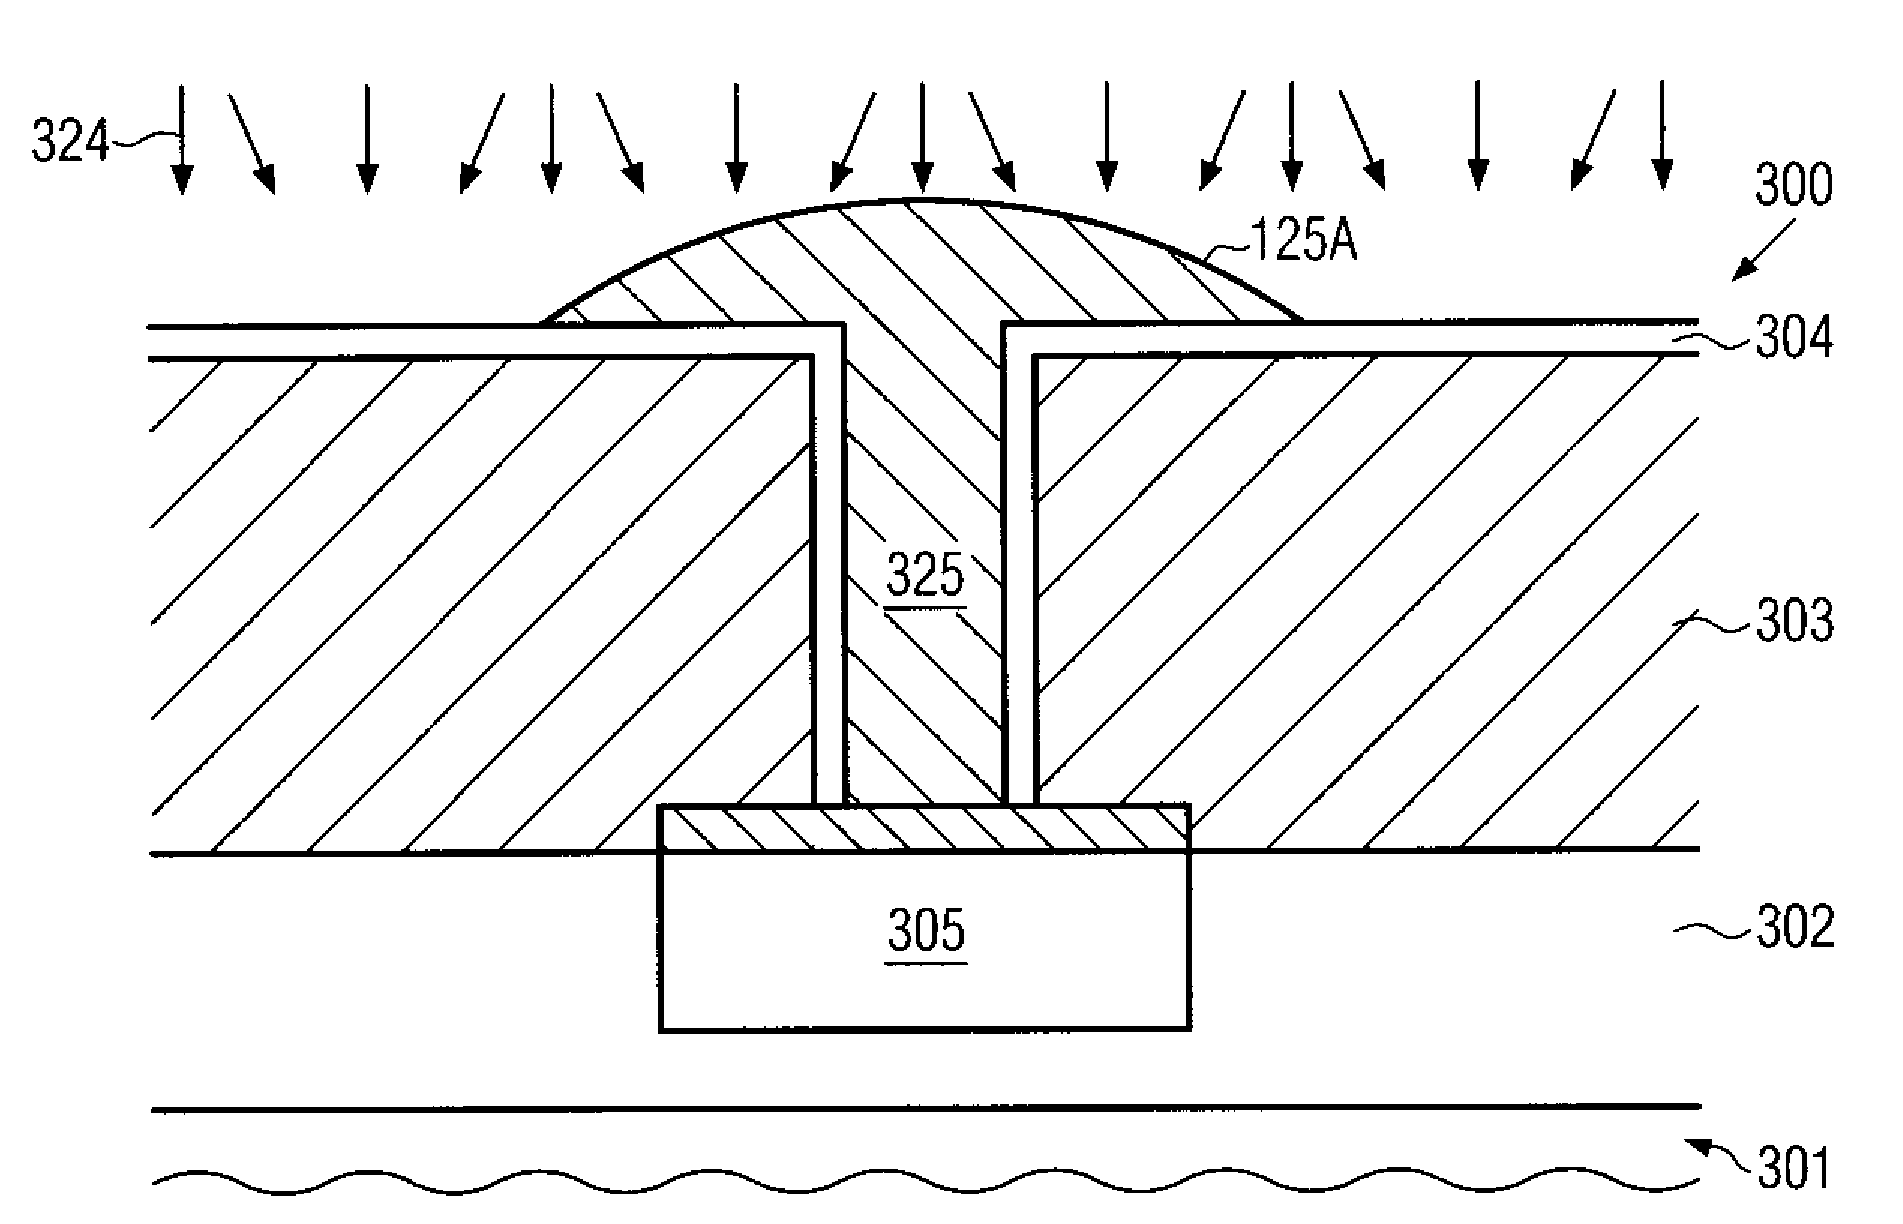 Method of forming a metal layer over a patterned dielectric by electroless deposition using a selectively provided activation layer